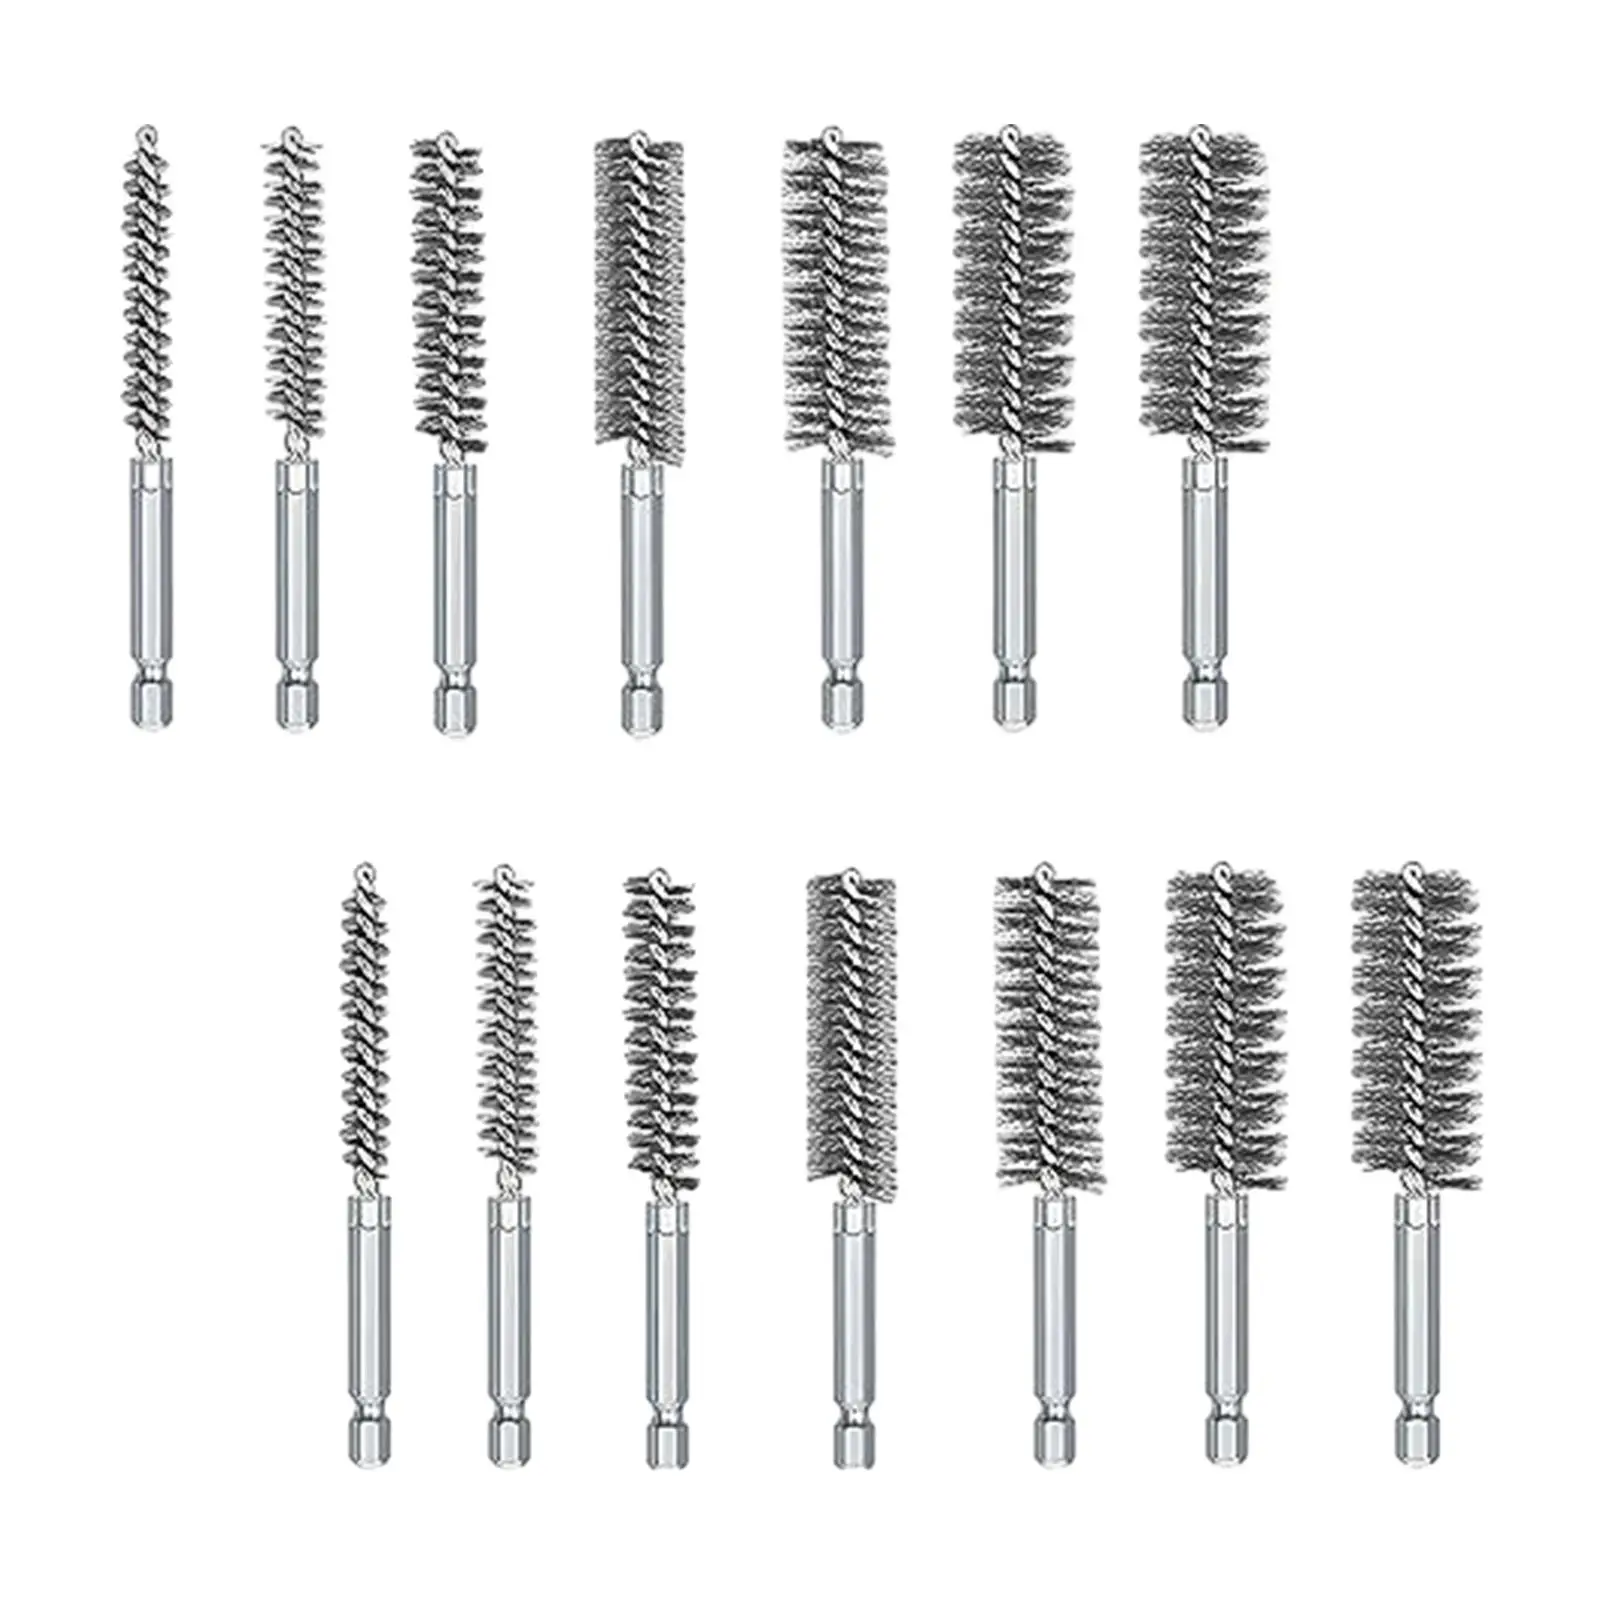 Bore Brush Set Sturdy Accessories Durable Professional 1/4 inch Hex Shank